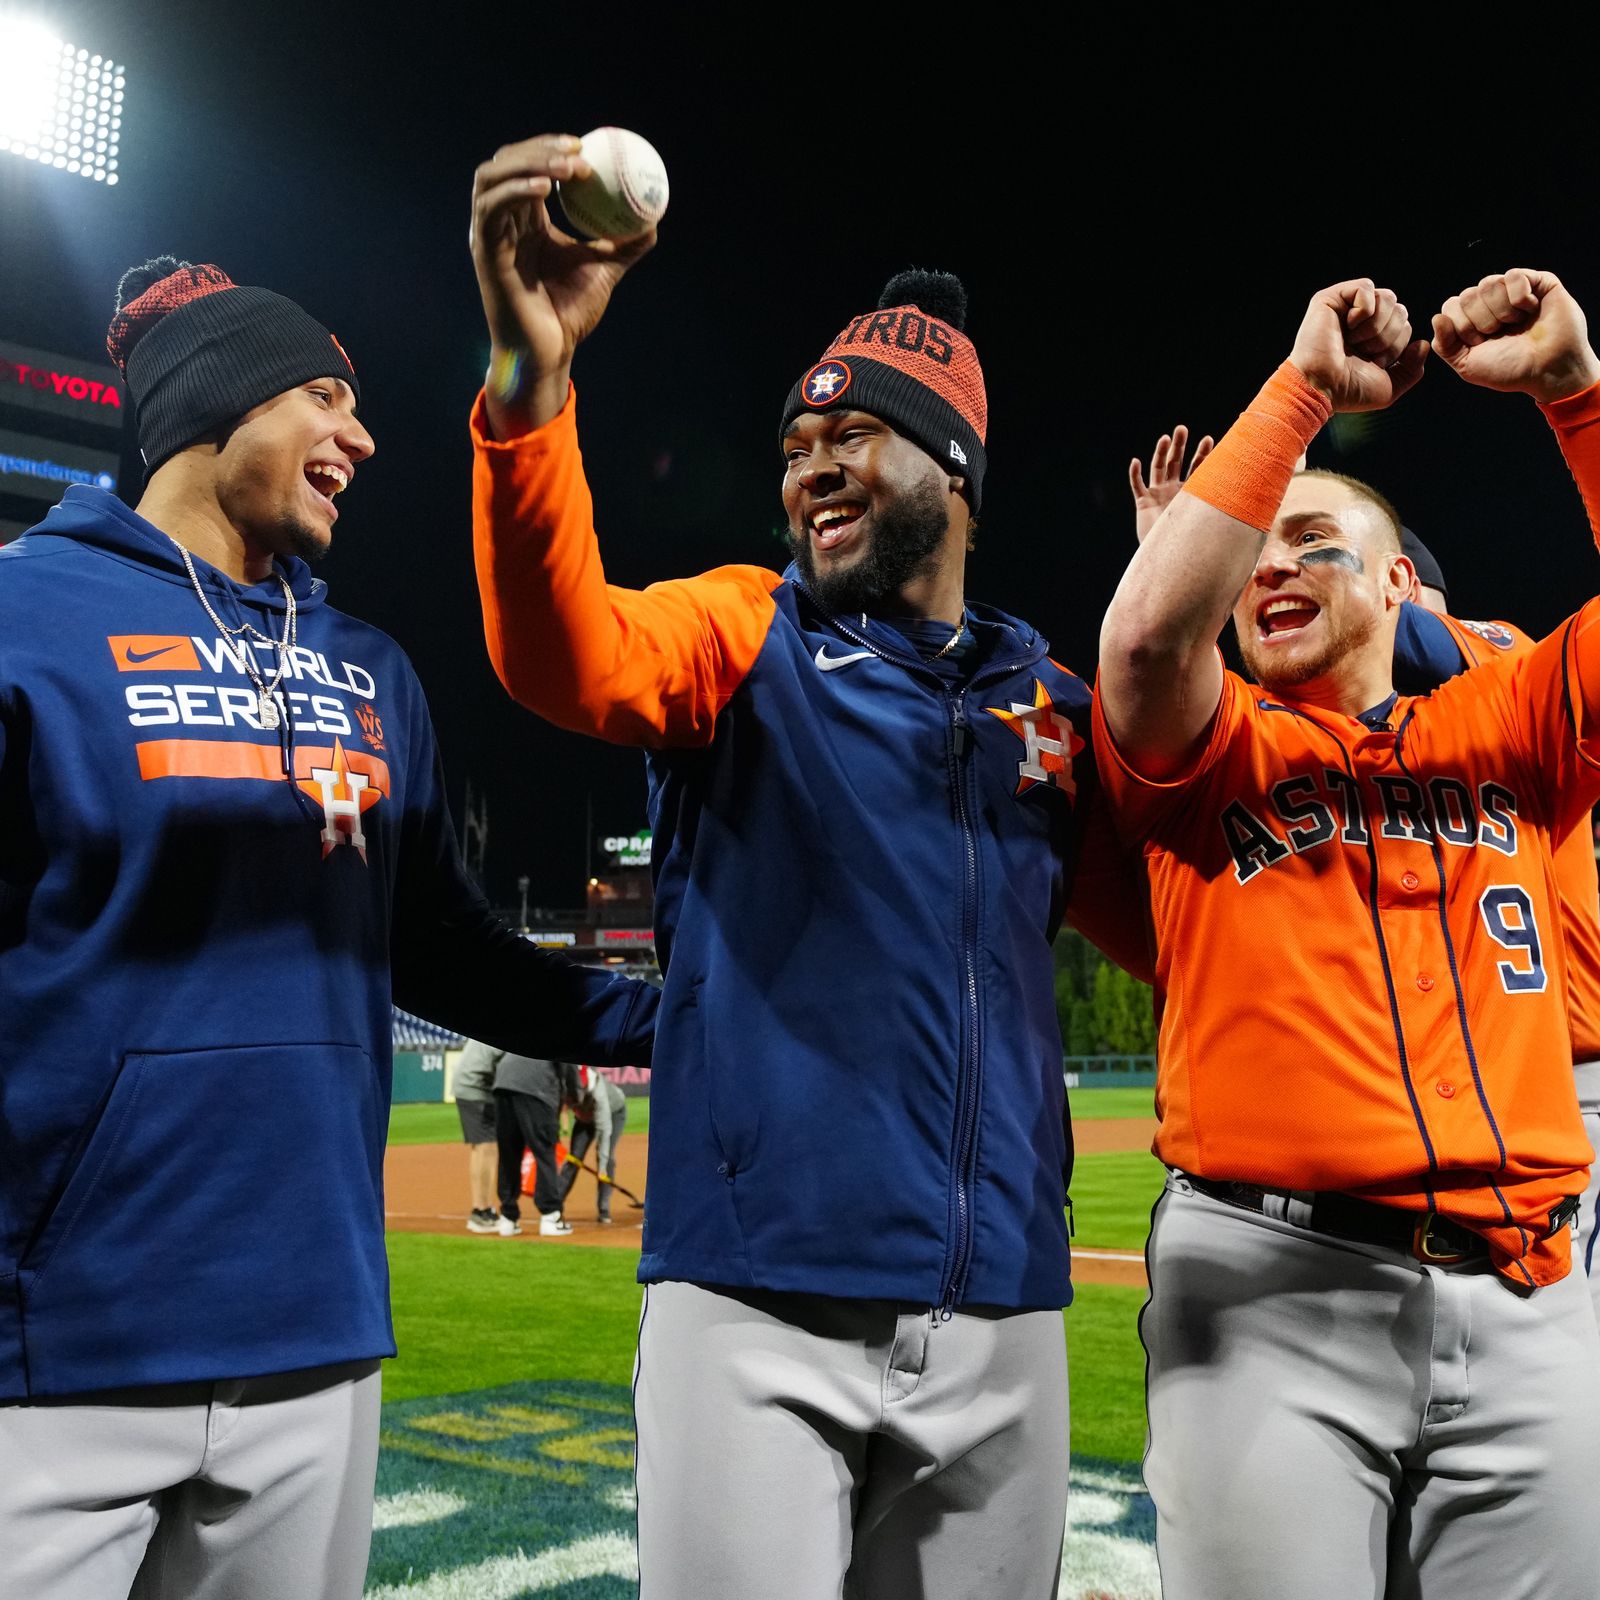 Astros no-hit Phillies in World Series Game 4